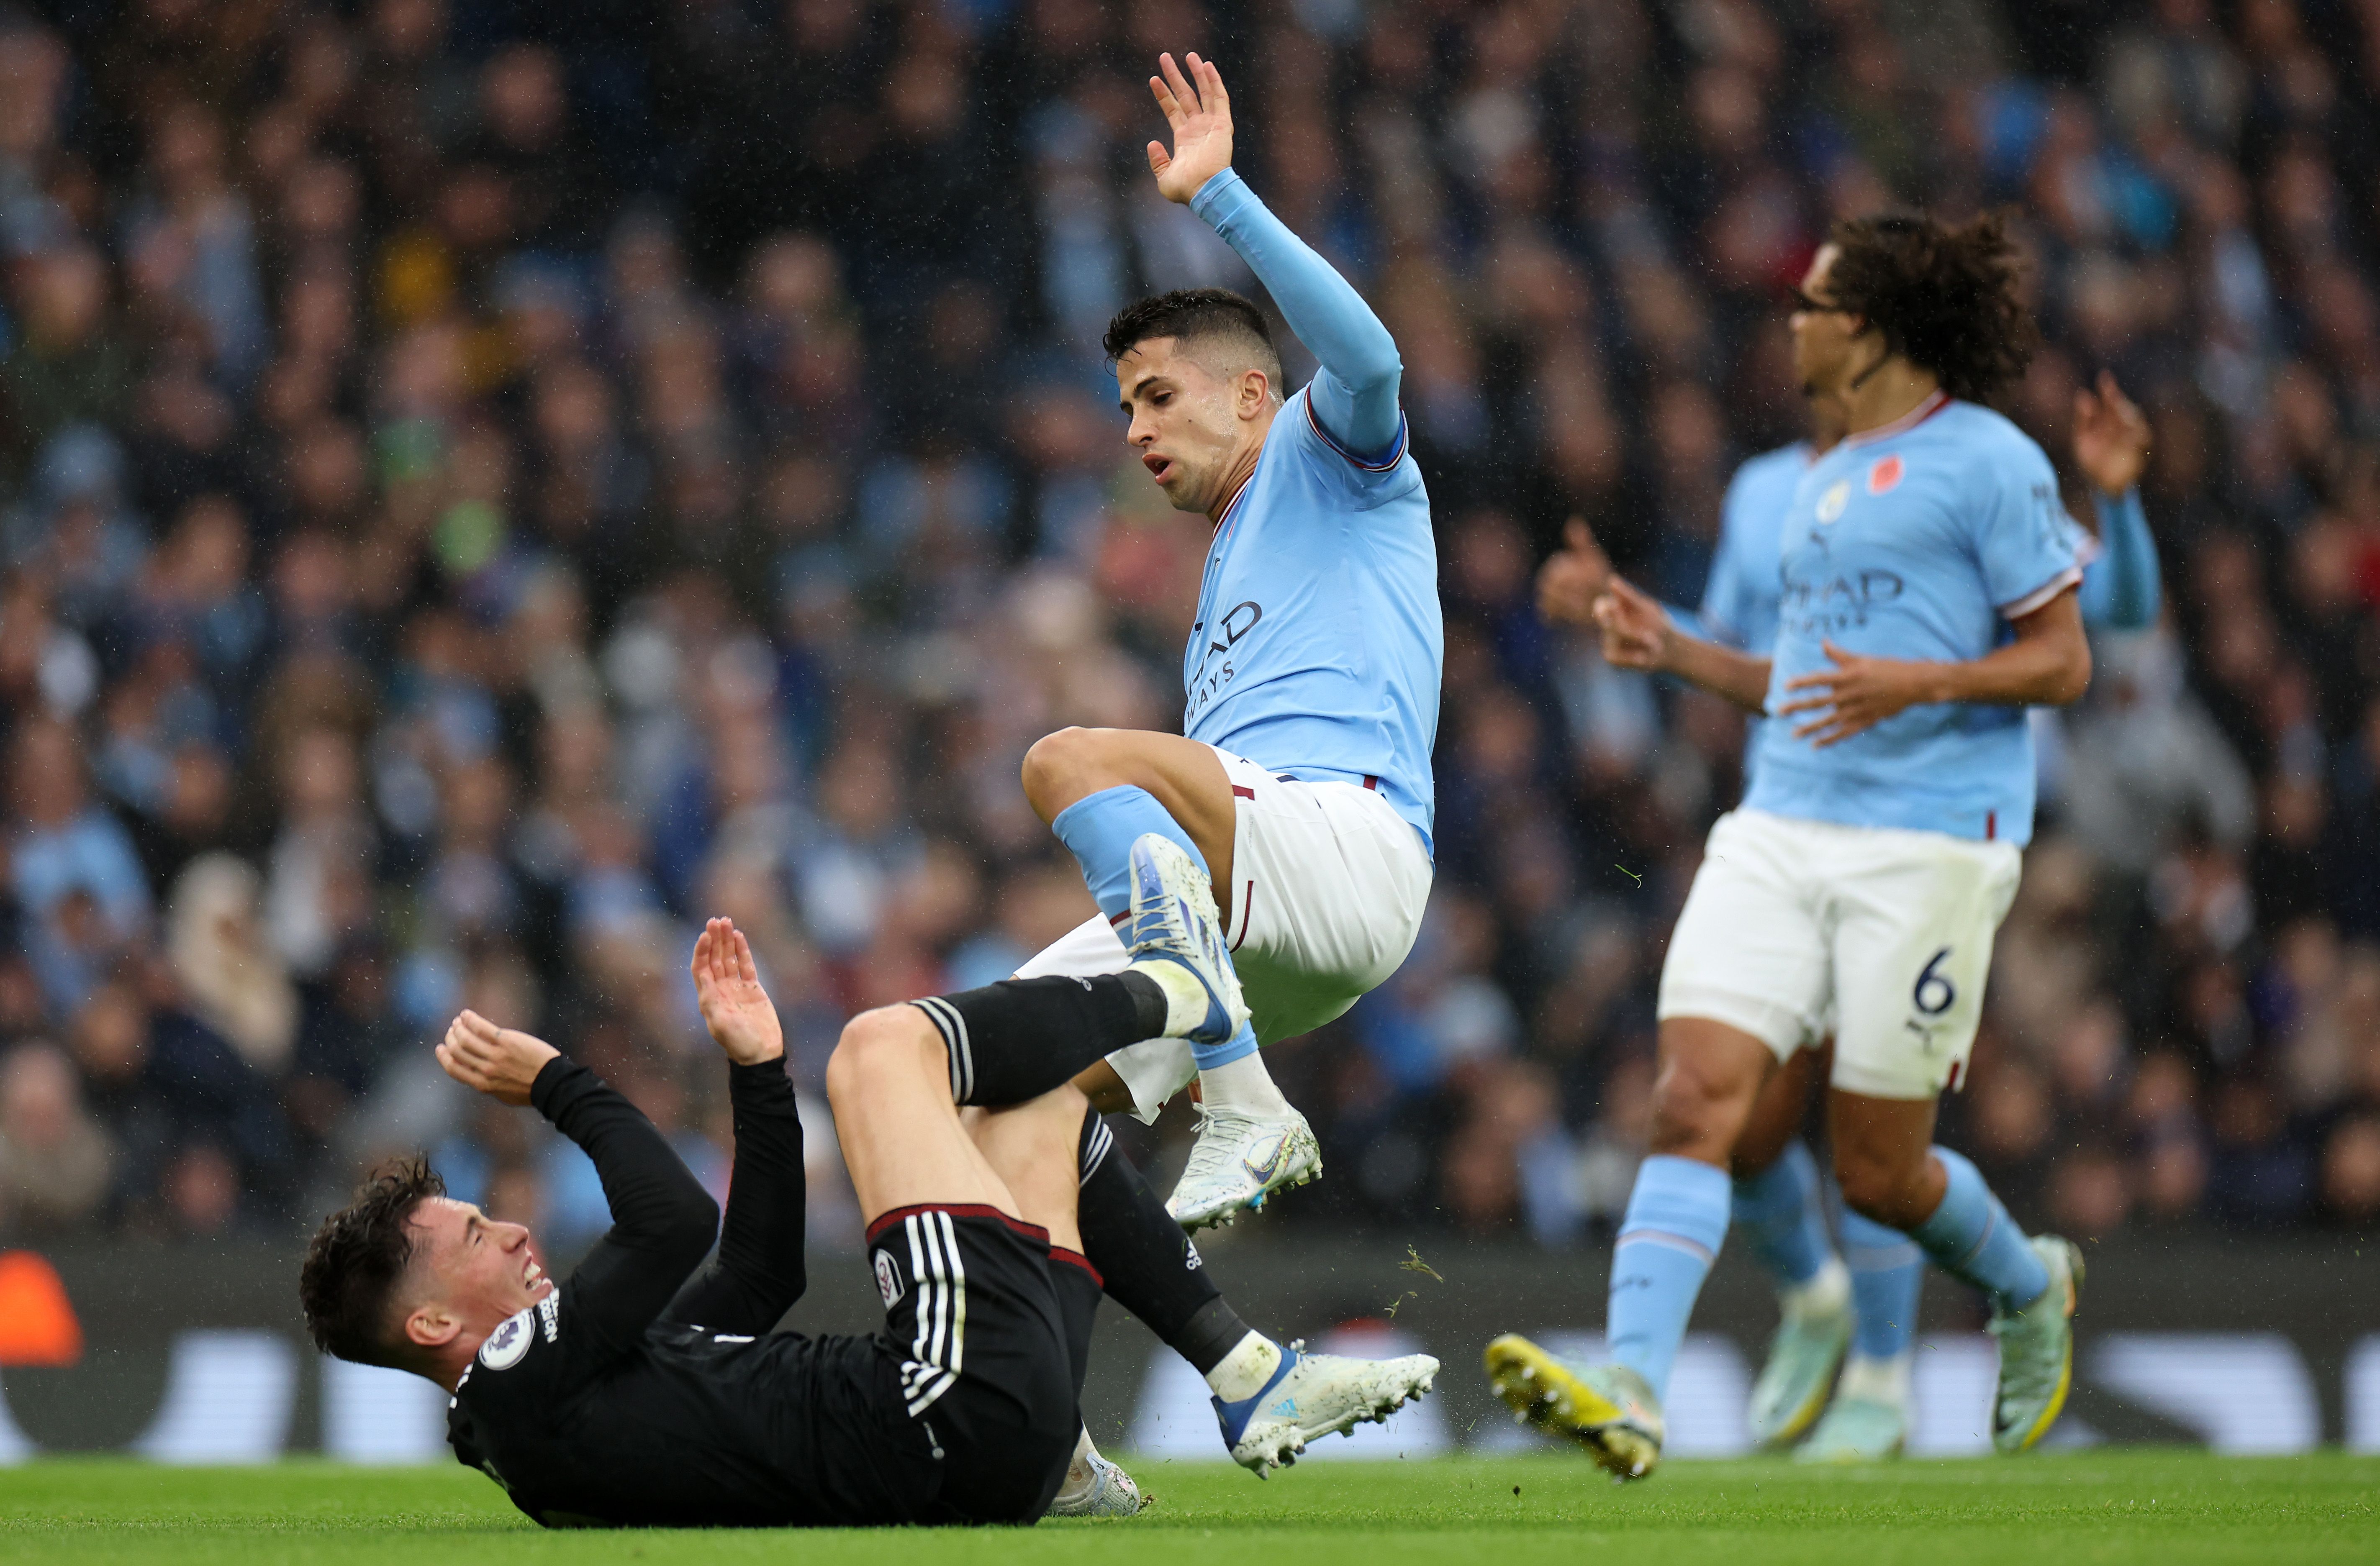 Joao Cancelo of Manchester City getting tackled